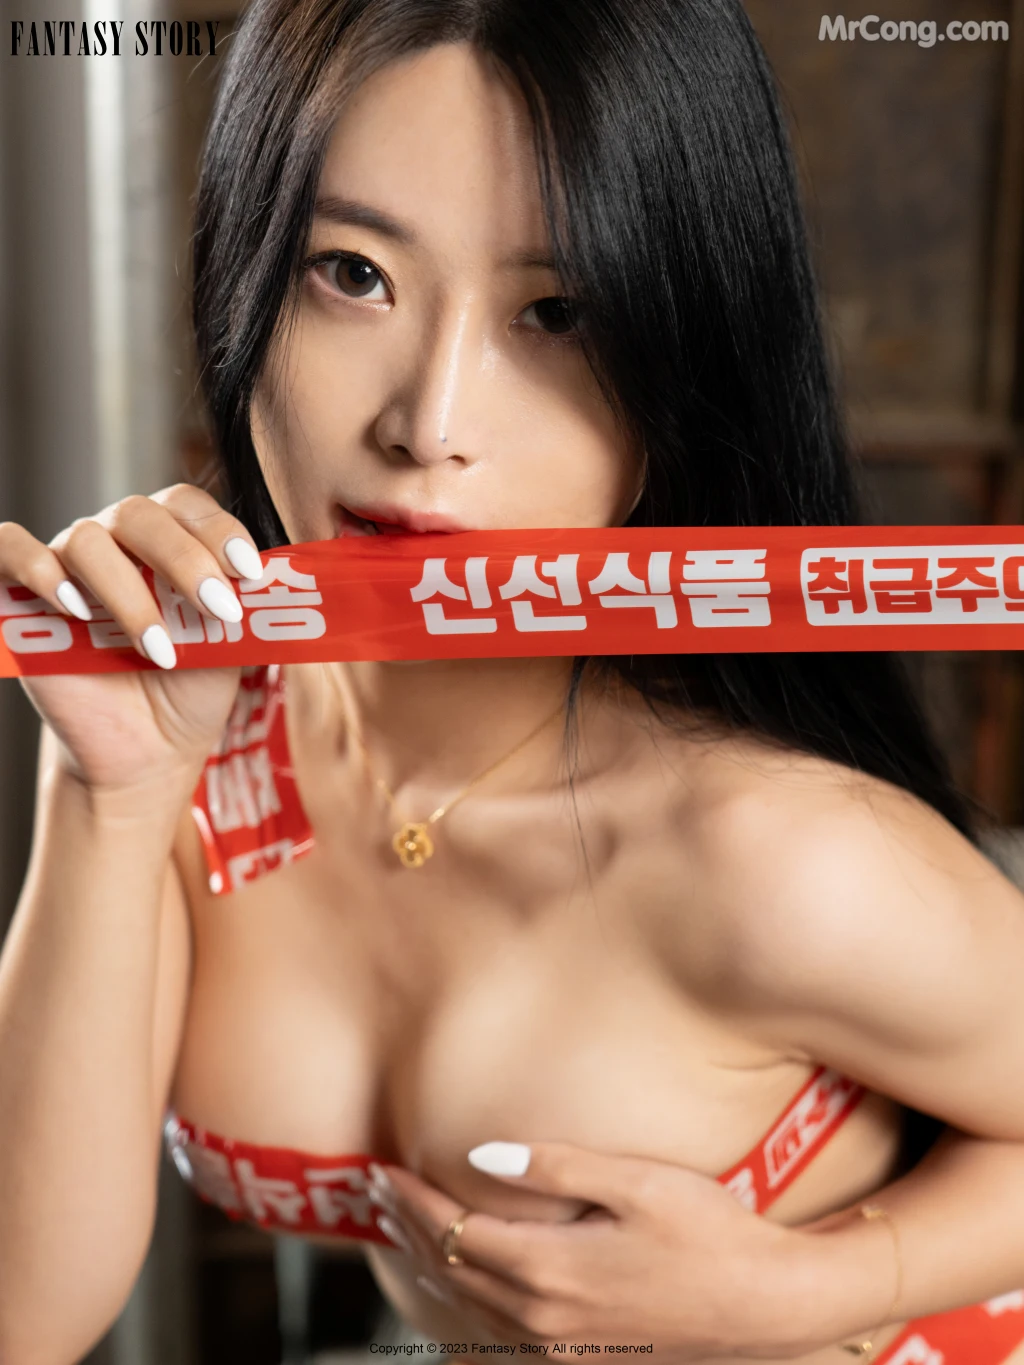 [Fantasy Story] Minjung (민정): Vol.2 Beauty of Packaging (99 photos )